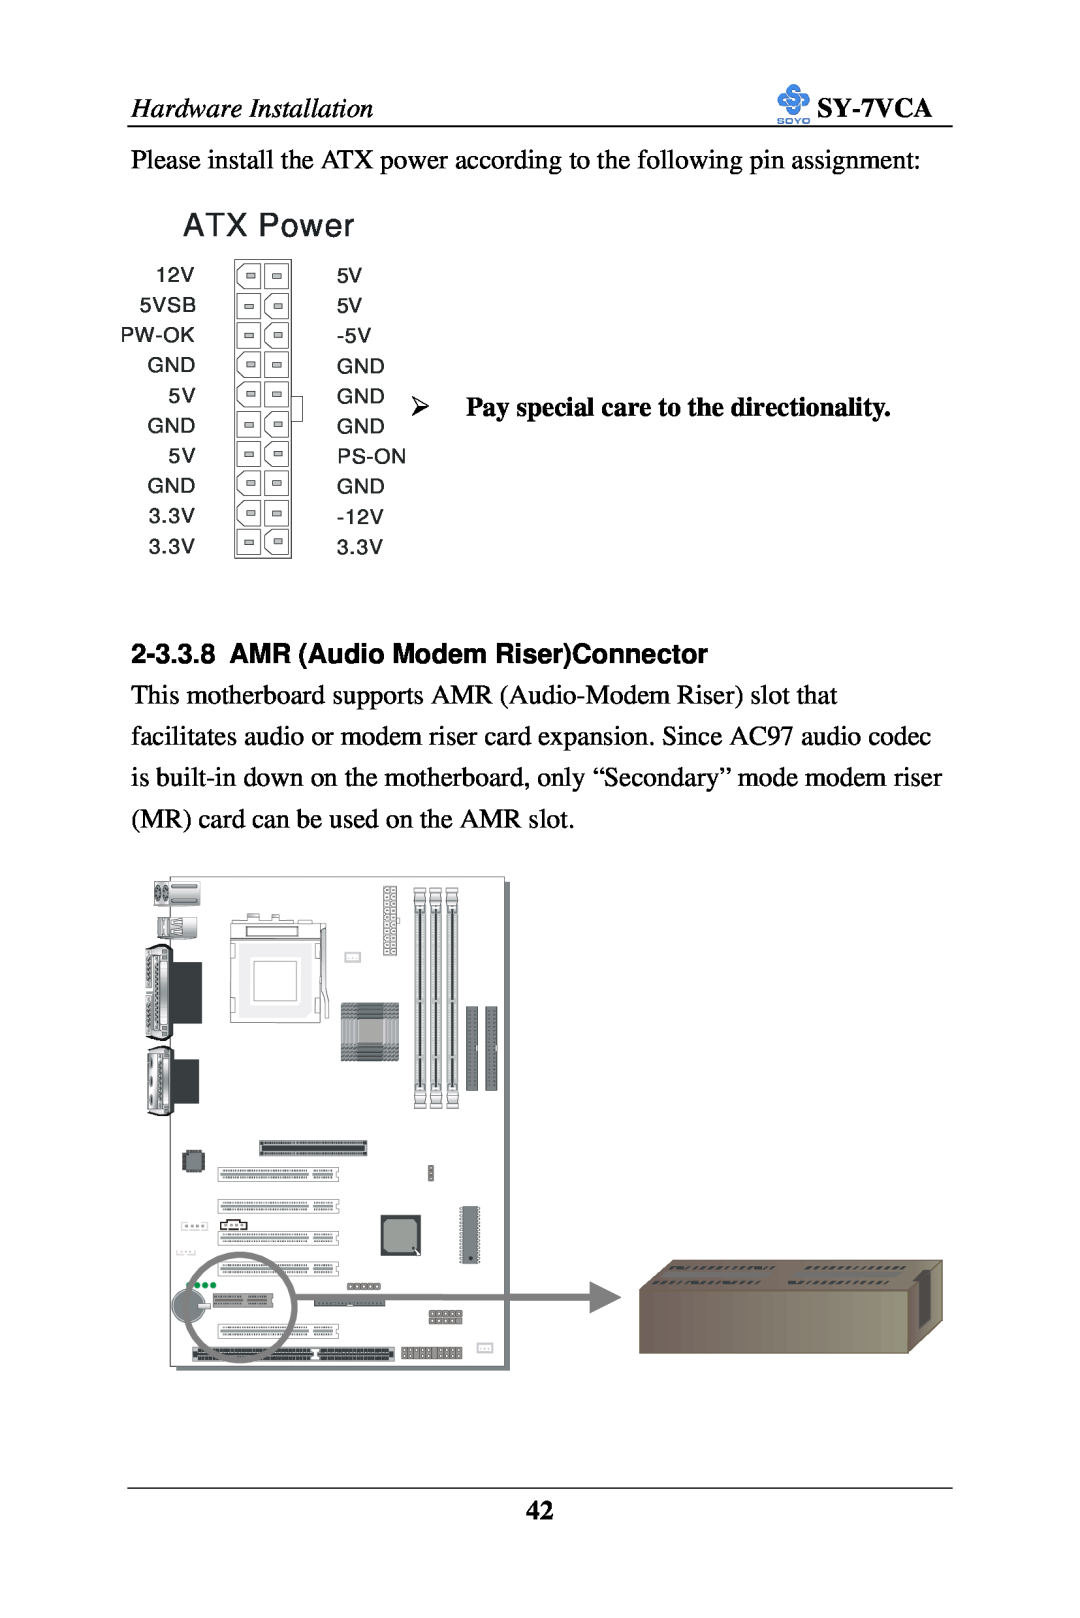 SOYO SY-7VCA user manual AMR Audio Modem RiserConnector, ATX Power, GND Ø Pay special care to the directionality 